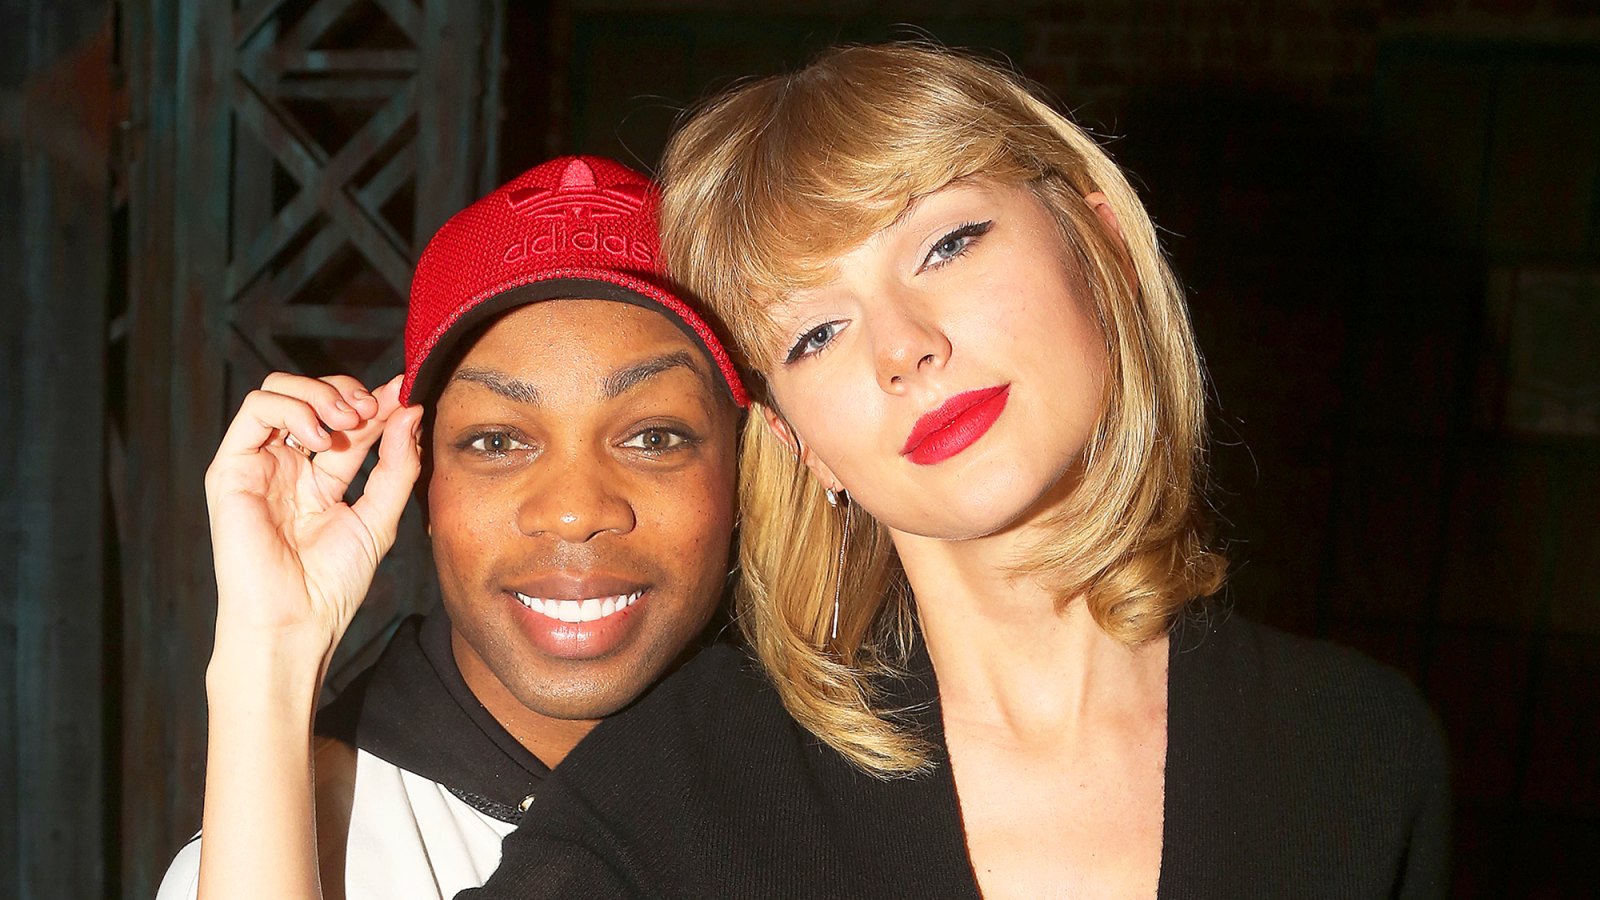 Todrick Hall and Taylor Swift pose backstage at the musical "Kinky Boots" on Broadway at The Al Hirschfeld Theater on November 23, 2016 in New York City.